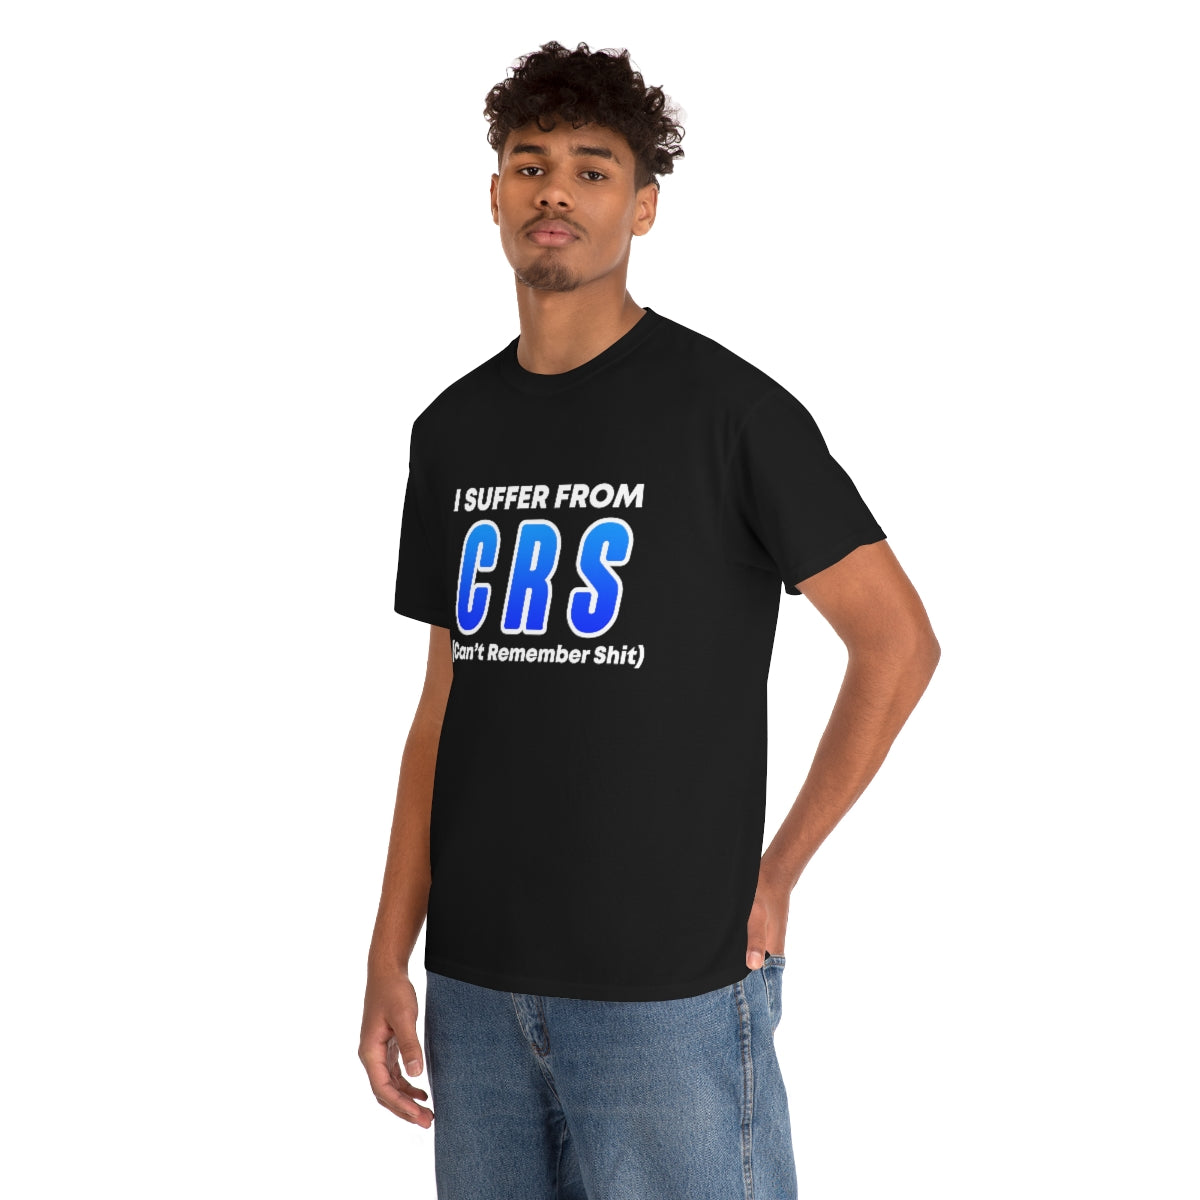 CAN'T REMEMBER SHIT (CRS) T-SHIRT